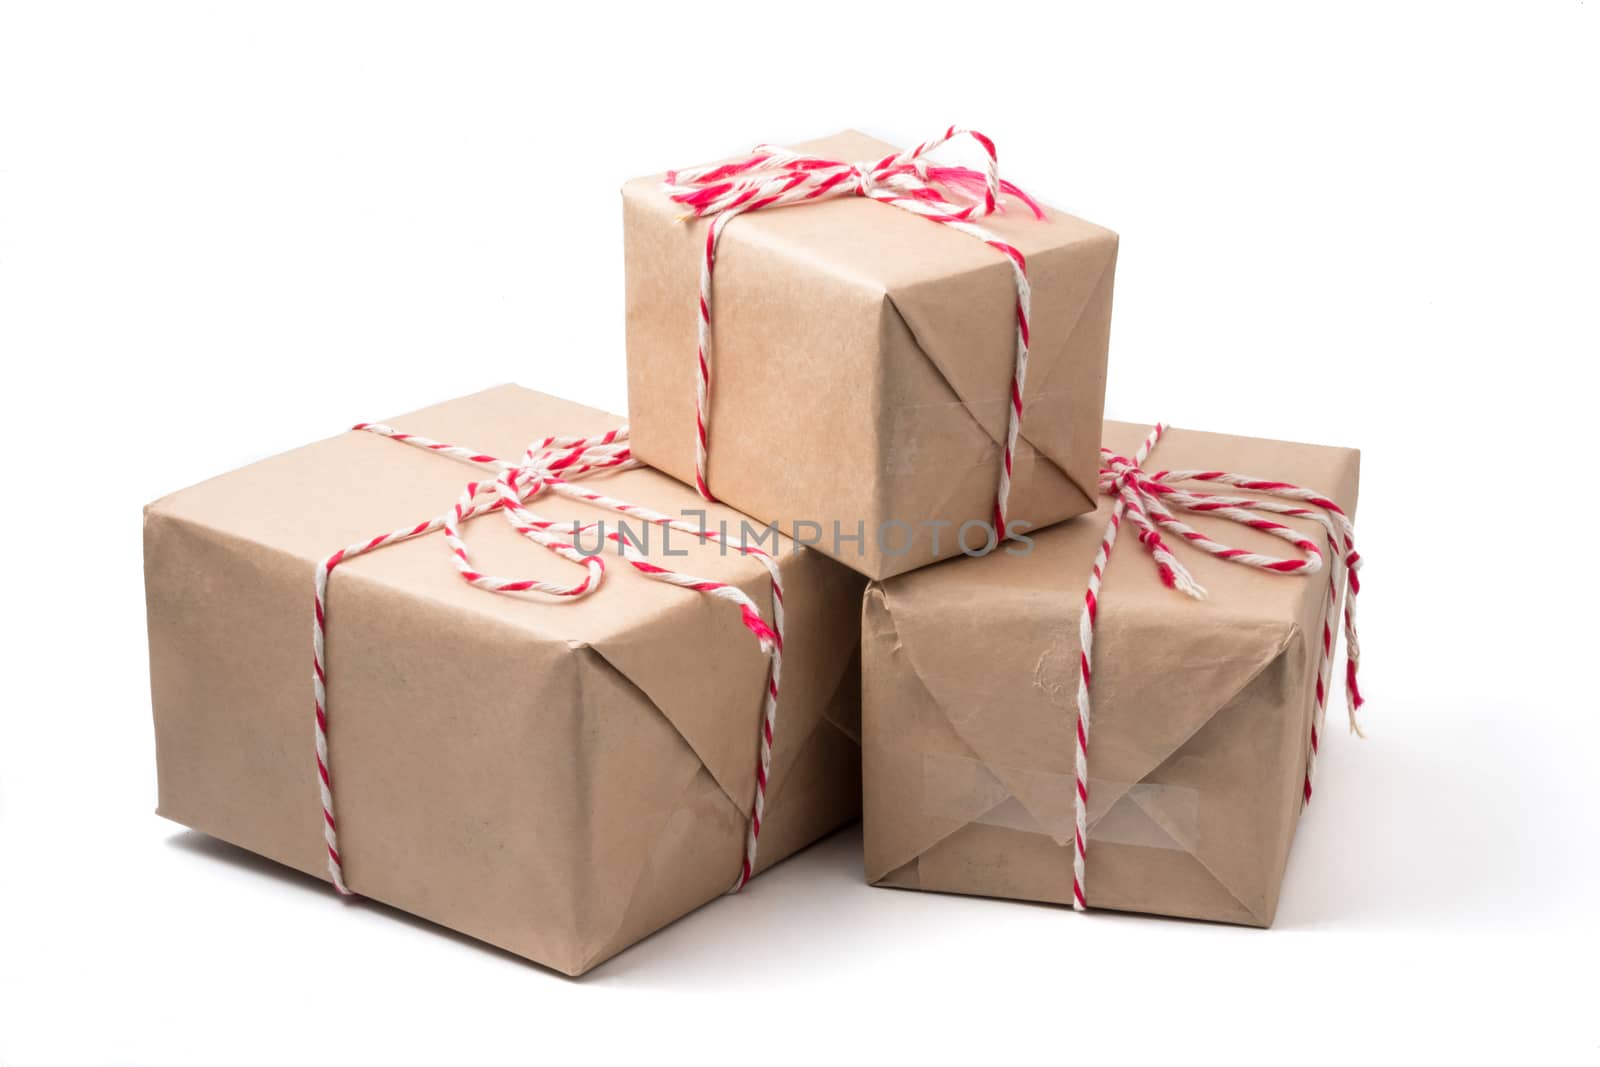 Gift packages wrapped in brown paper on white background.